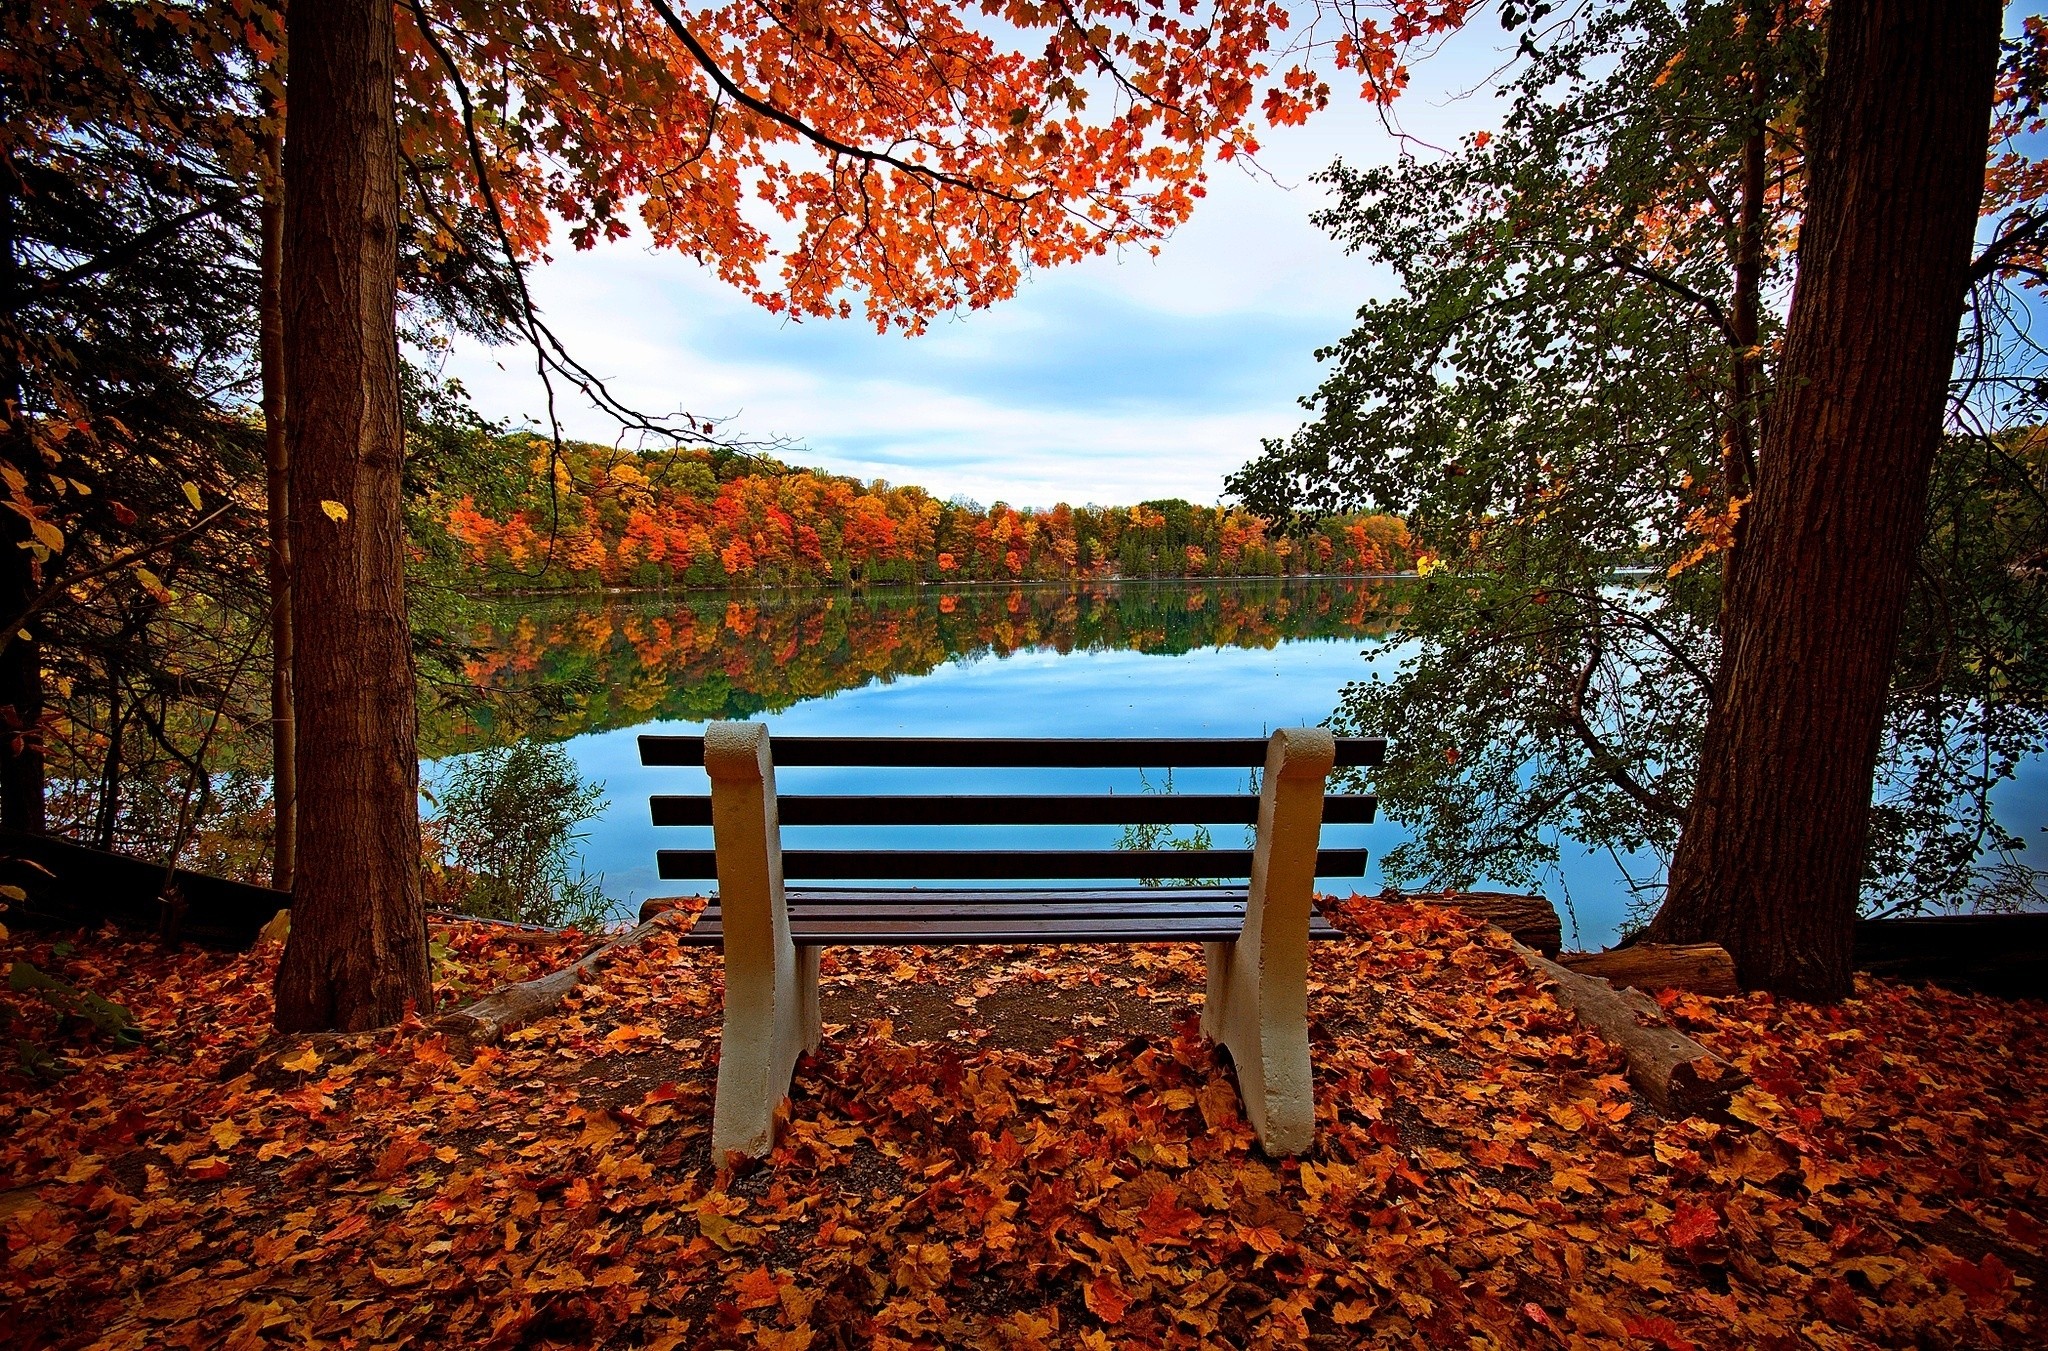 rivers, nature, autumn, trees, lake, bench cellphone